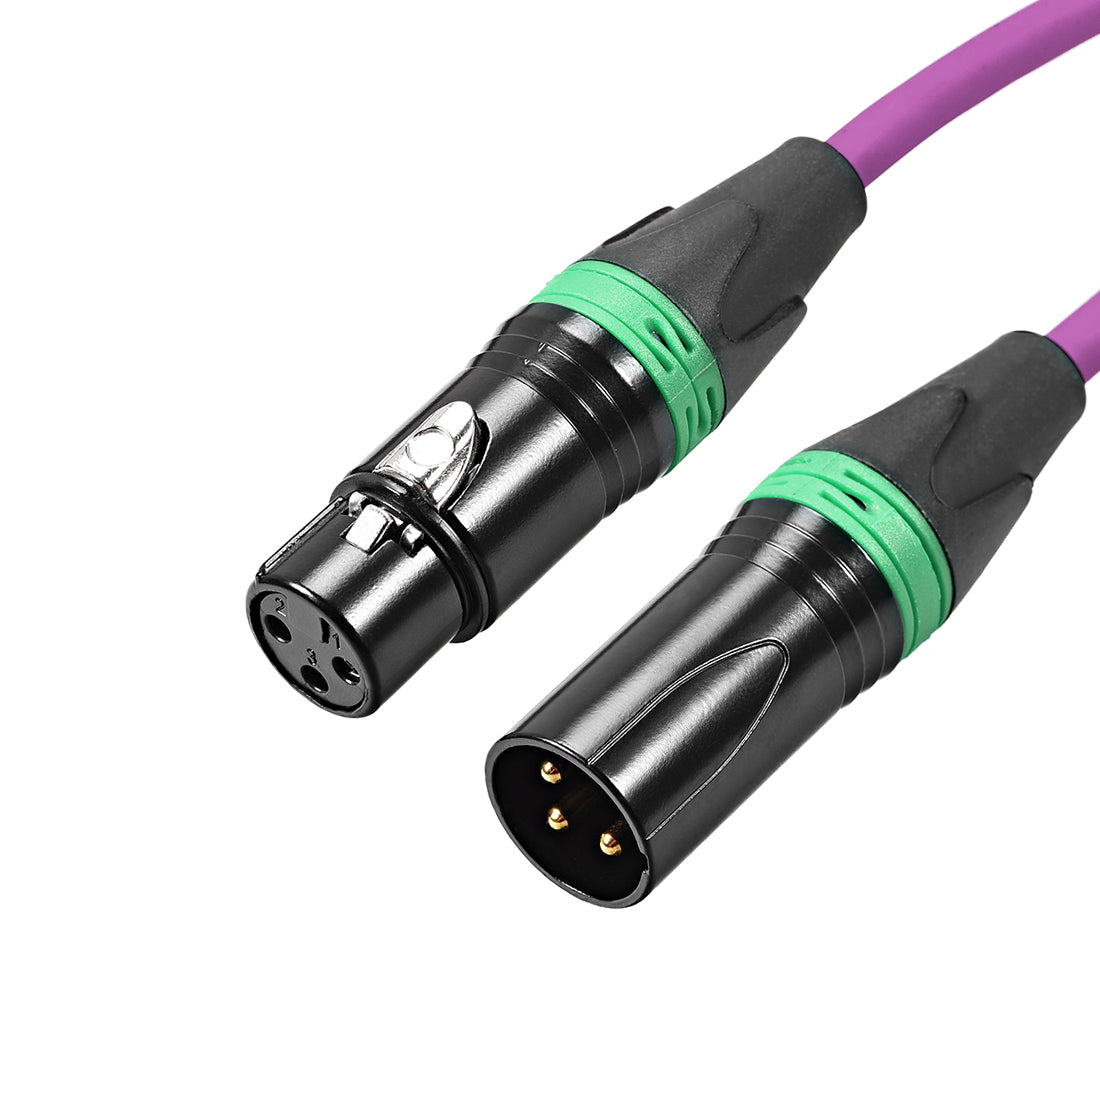 uxcell Uxcell XLR Male to XLR Female Cable Line for Microphone Video Camera Sound Card Mixer Green Black XLR Purple Line 0.5M 1.64ft